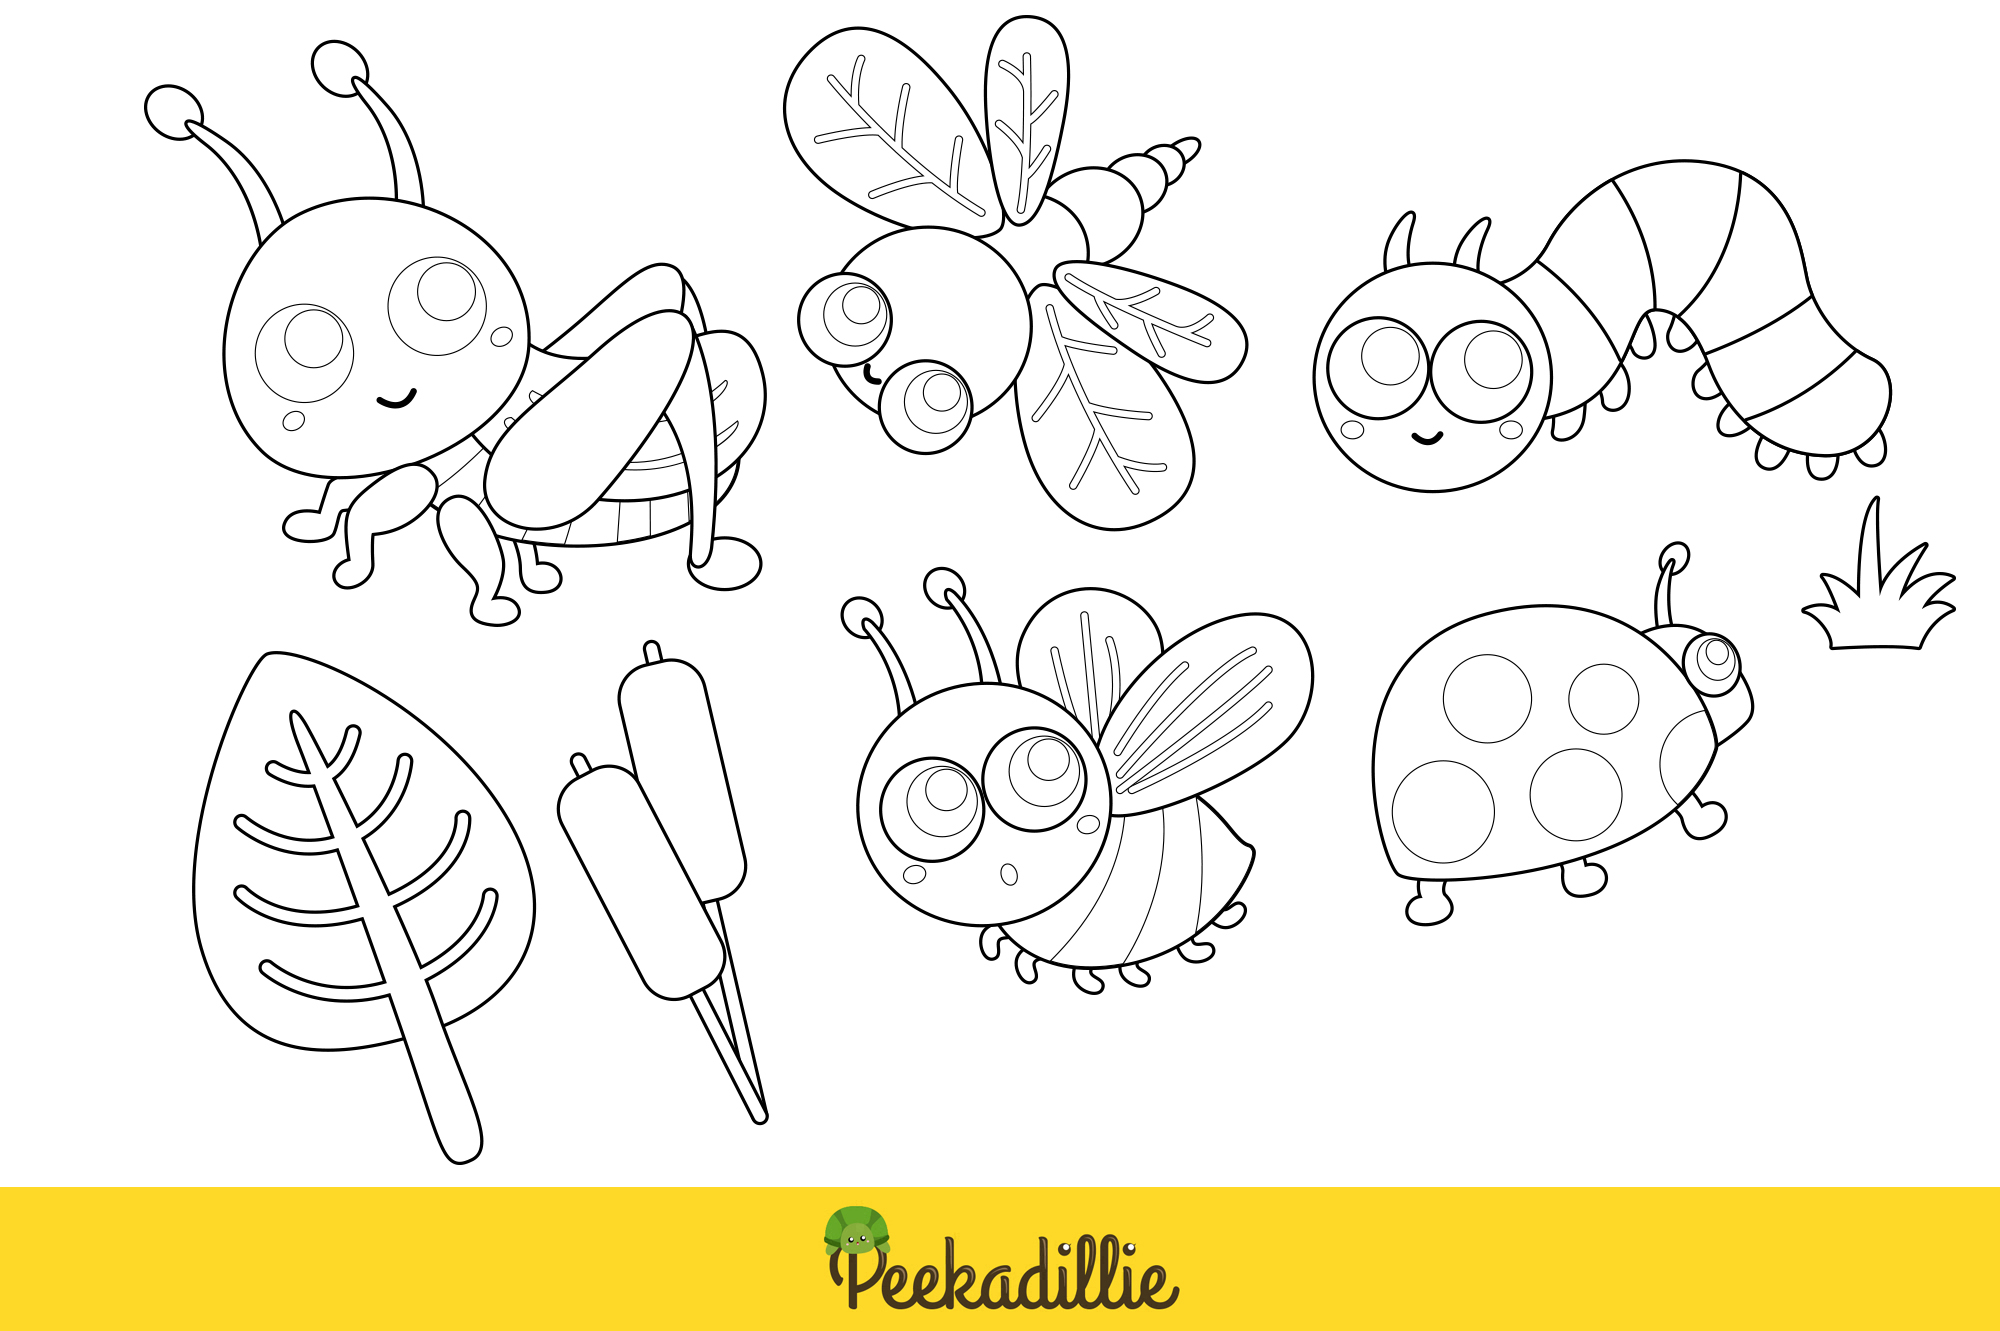 Coloring page with four bugs and a leaf.